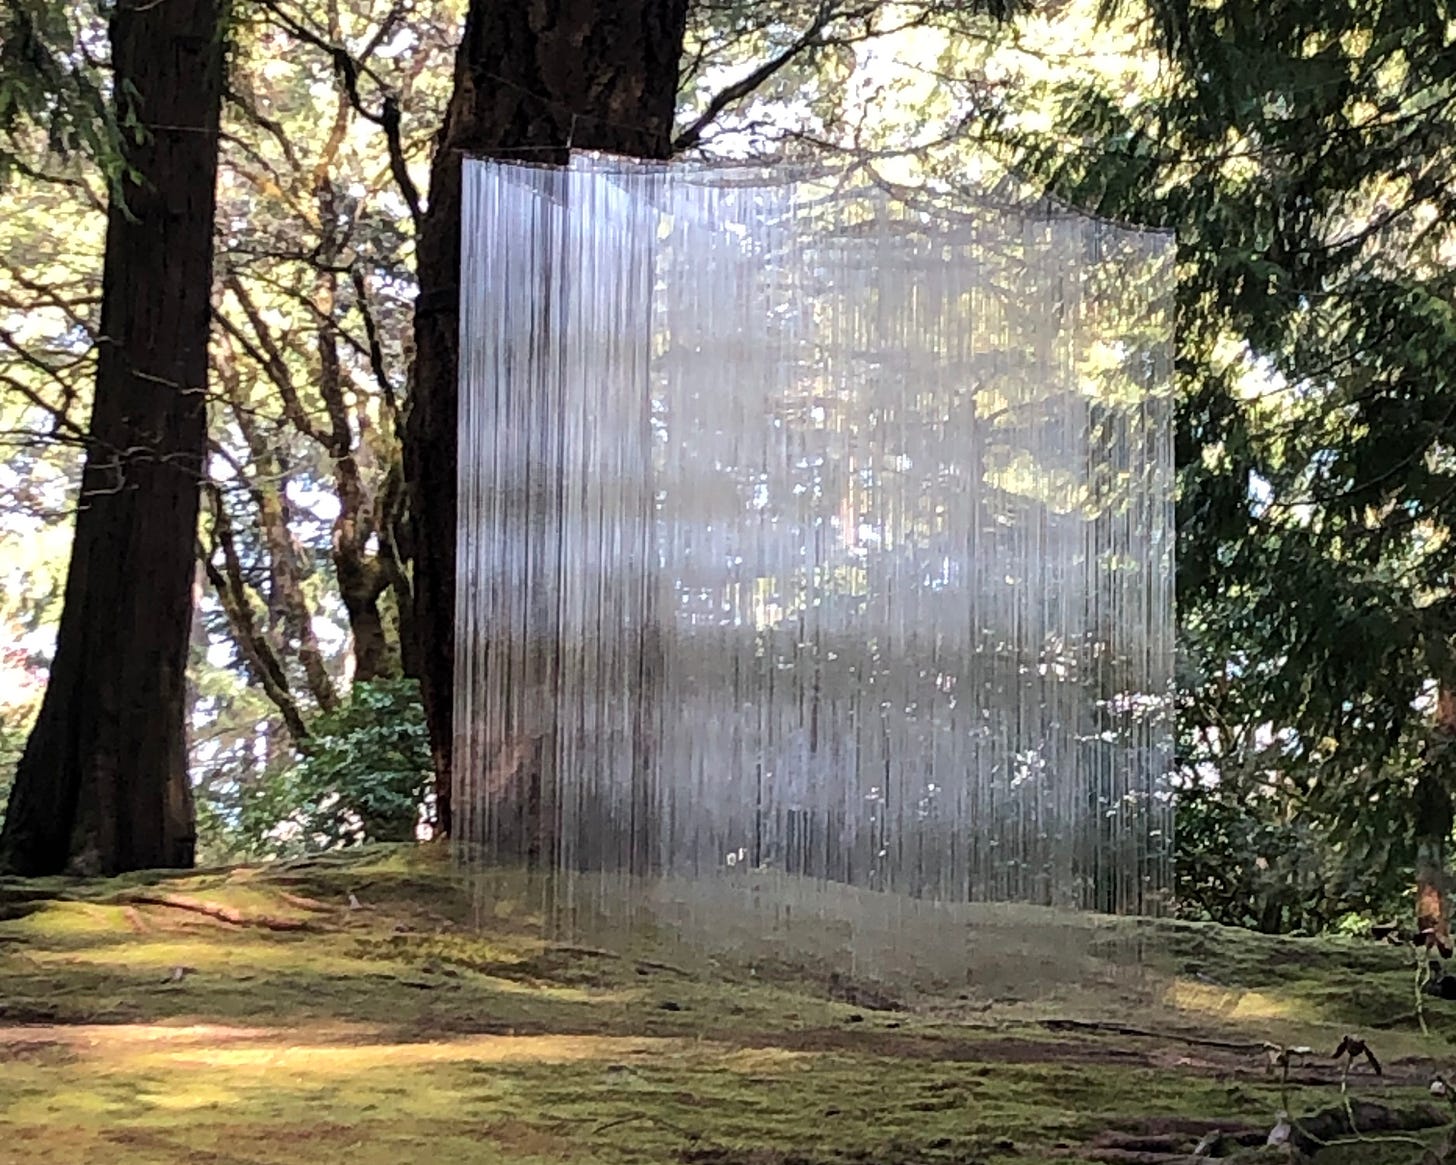 Translucent threads of glass hang in a grove of trees.